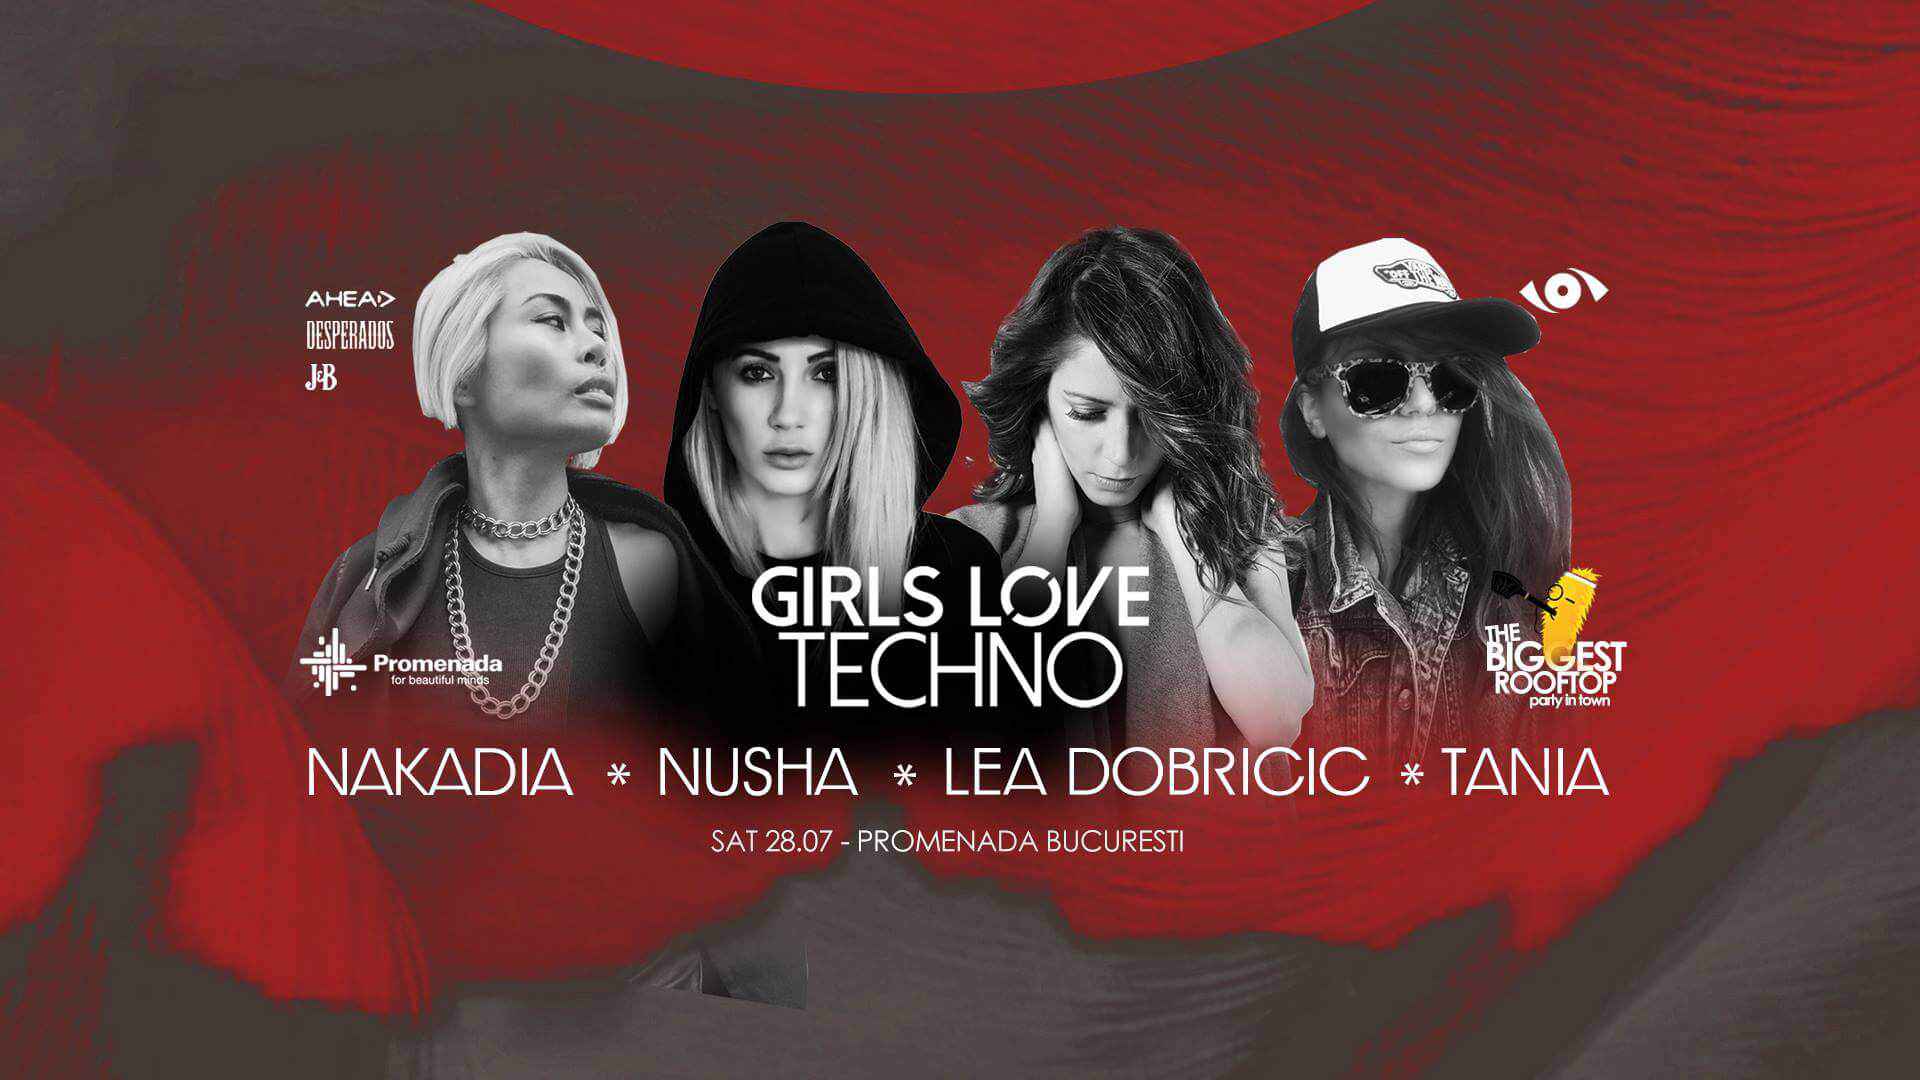 The Biggest Rooftop Party In Town prezintă Girls Love Techno